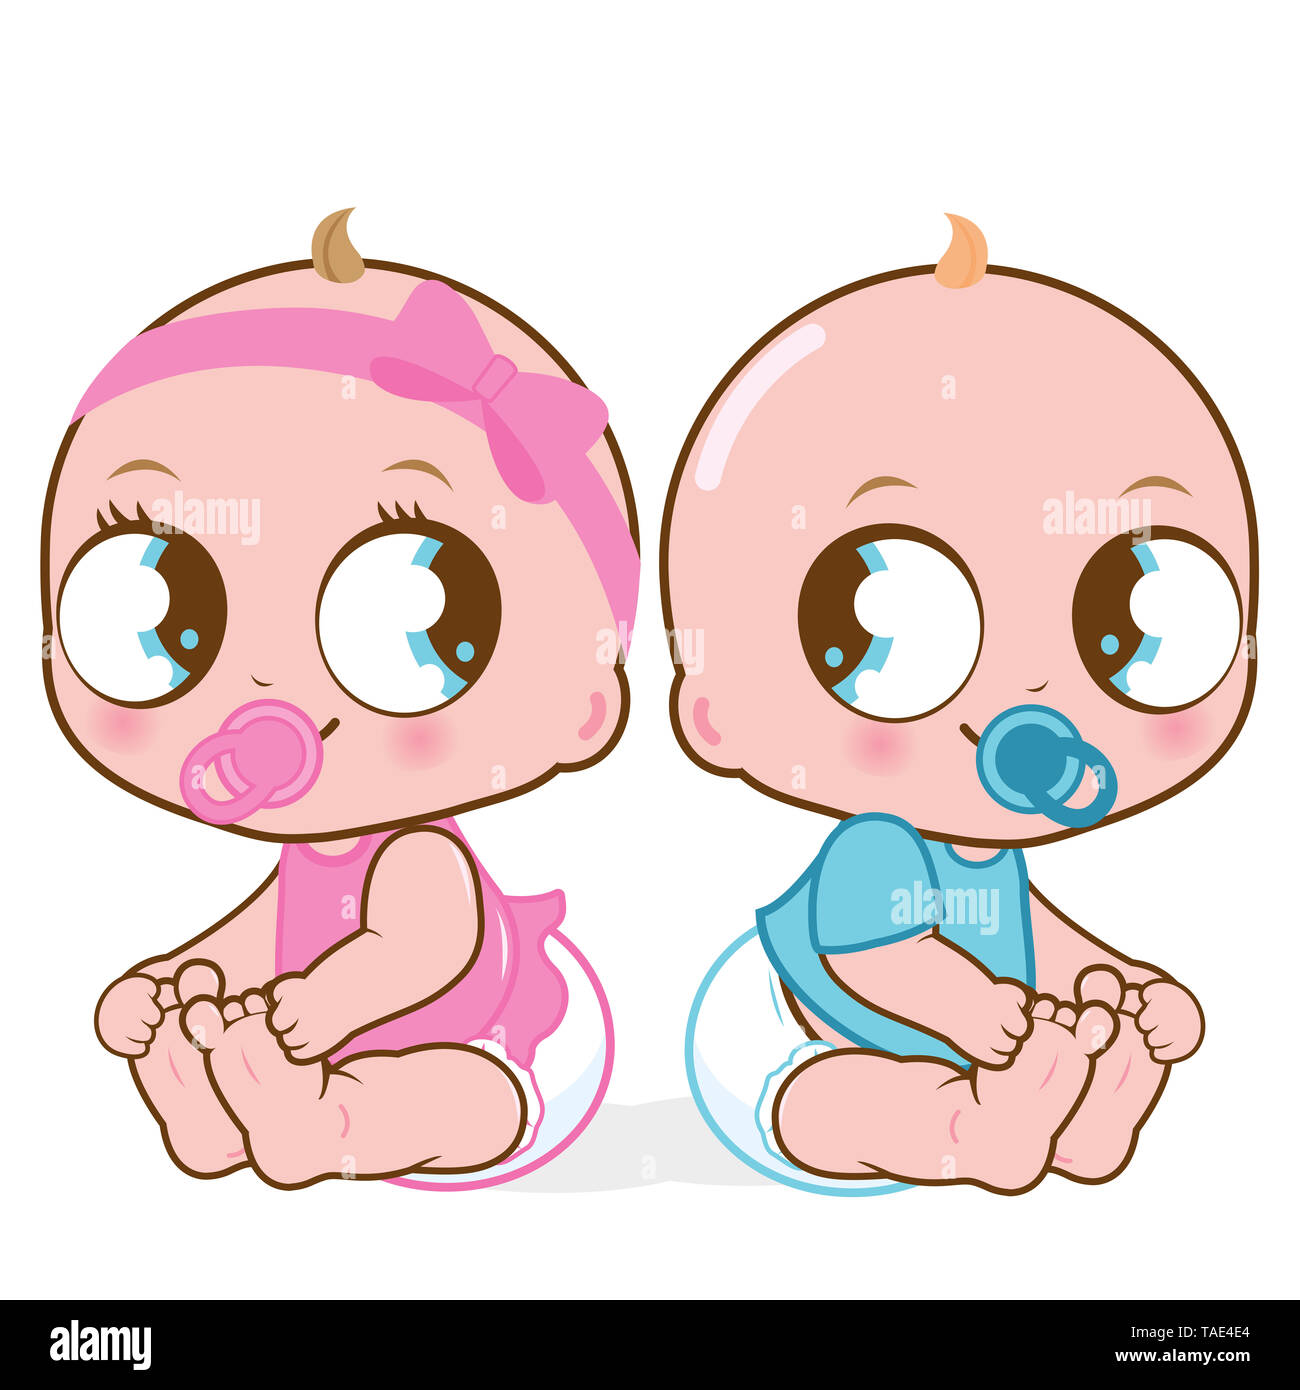 Illustration of two cute babies, a baby girl and a baby boy. Stock Photo